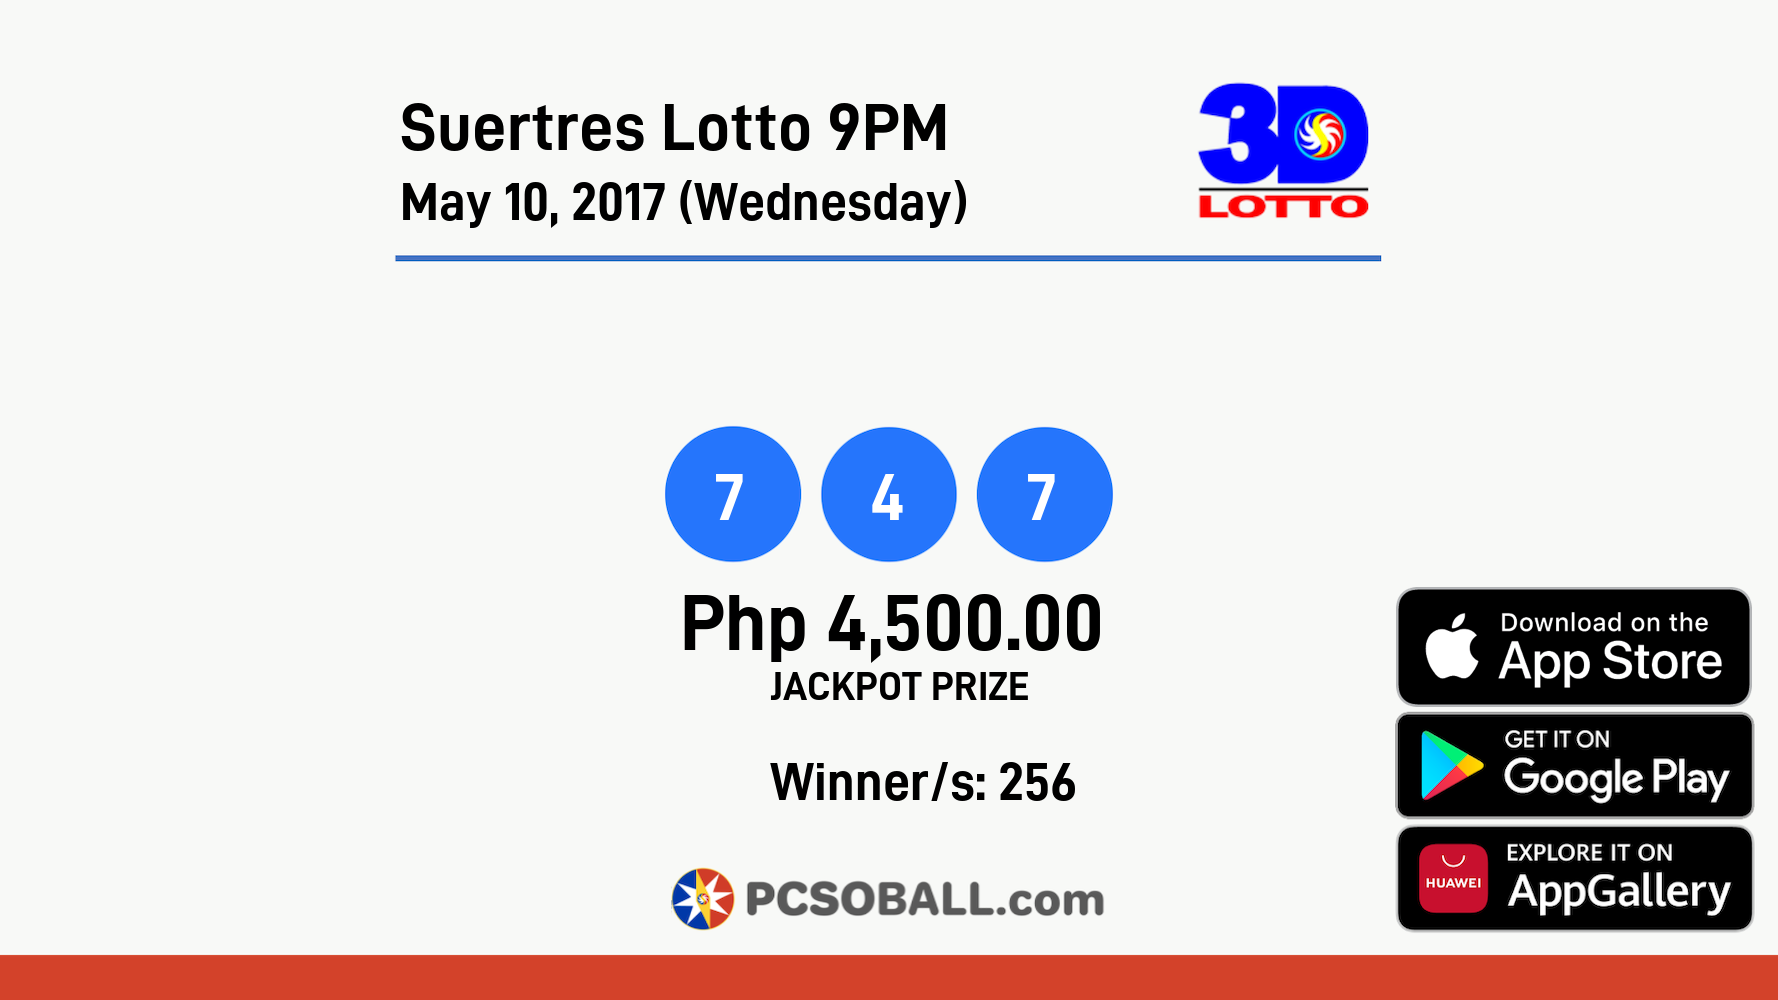 Suertres Lotto 9PM May 10, 2017 (Wednesday) Result